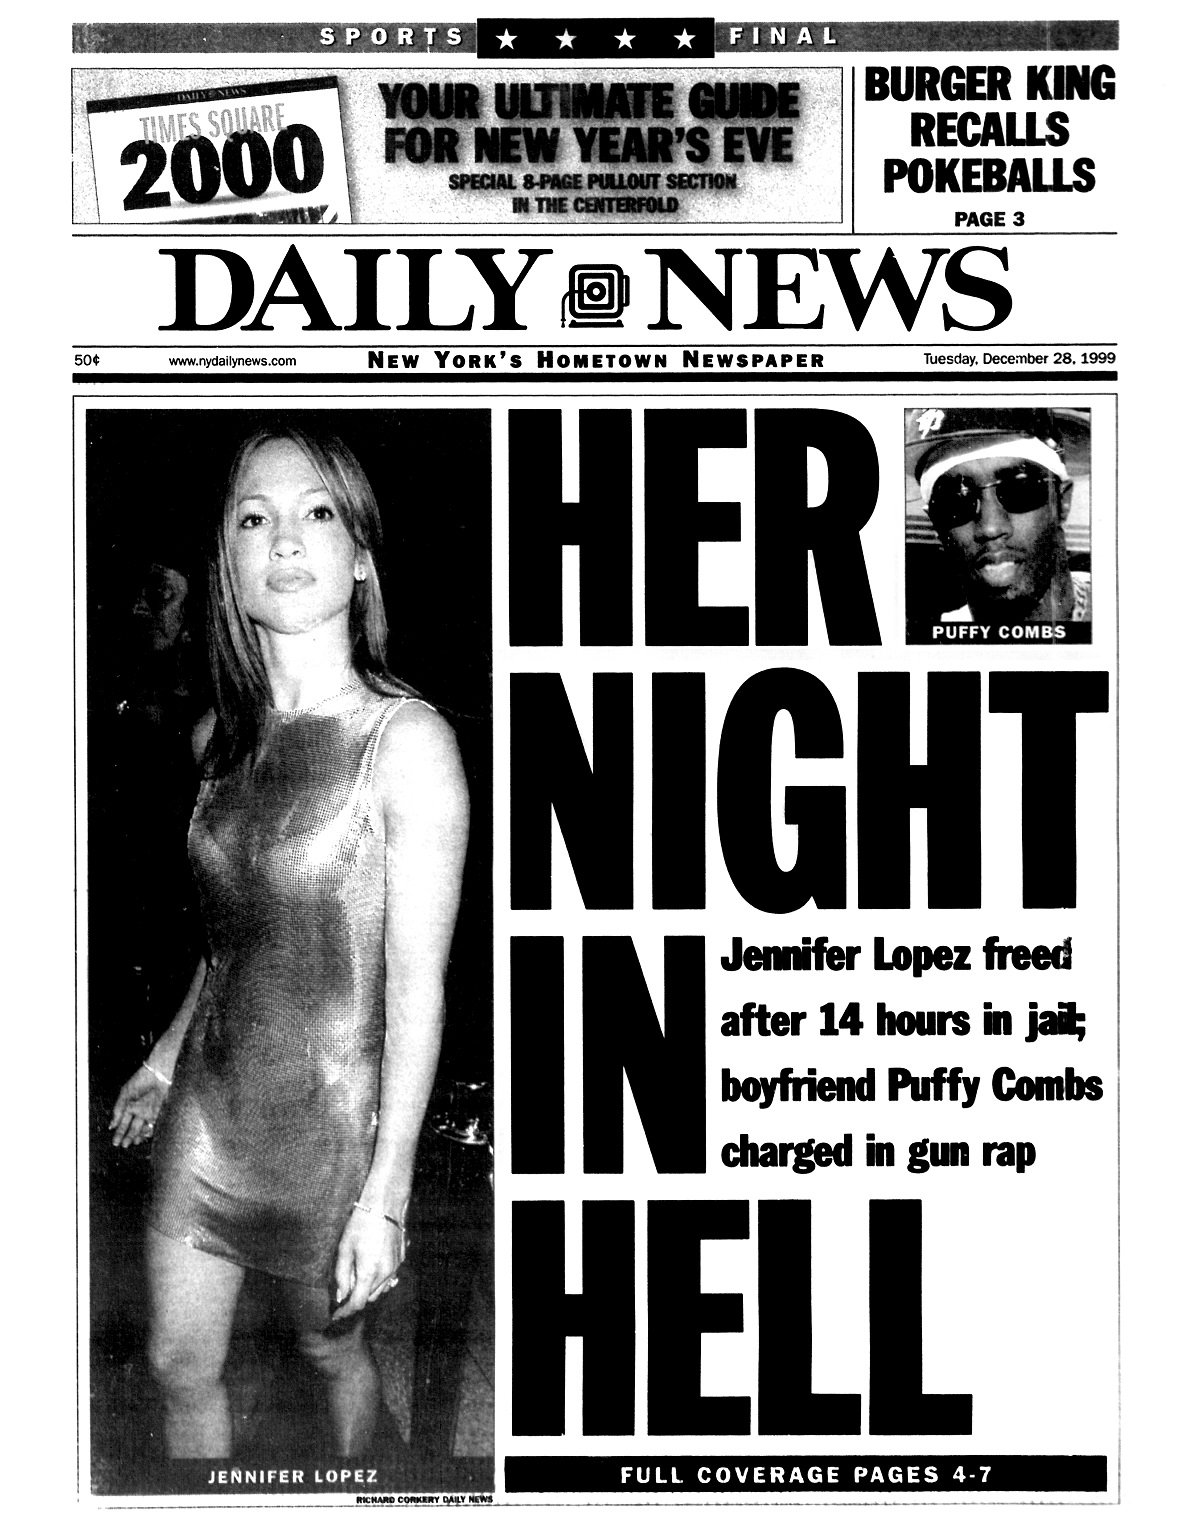 Daily News front page December 28, 1999, Headline: HER NIGHT IN HELL - Jennifer Lopez freed after 14 hours in jail; boyfriend Puffy Combs charged in gun rap.